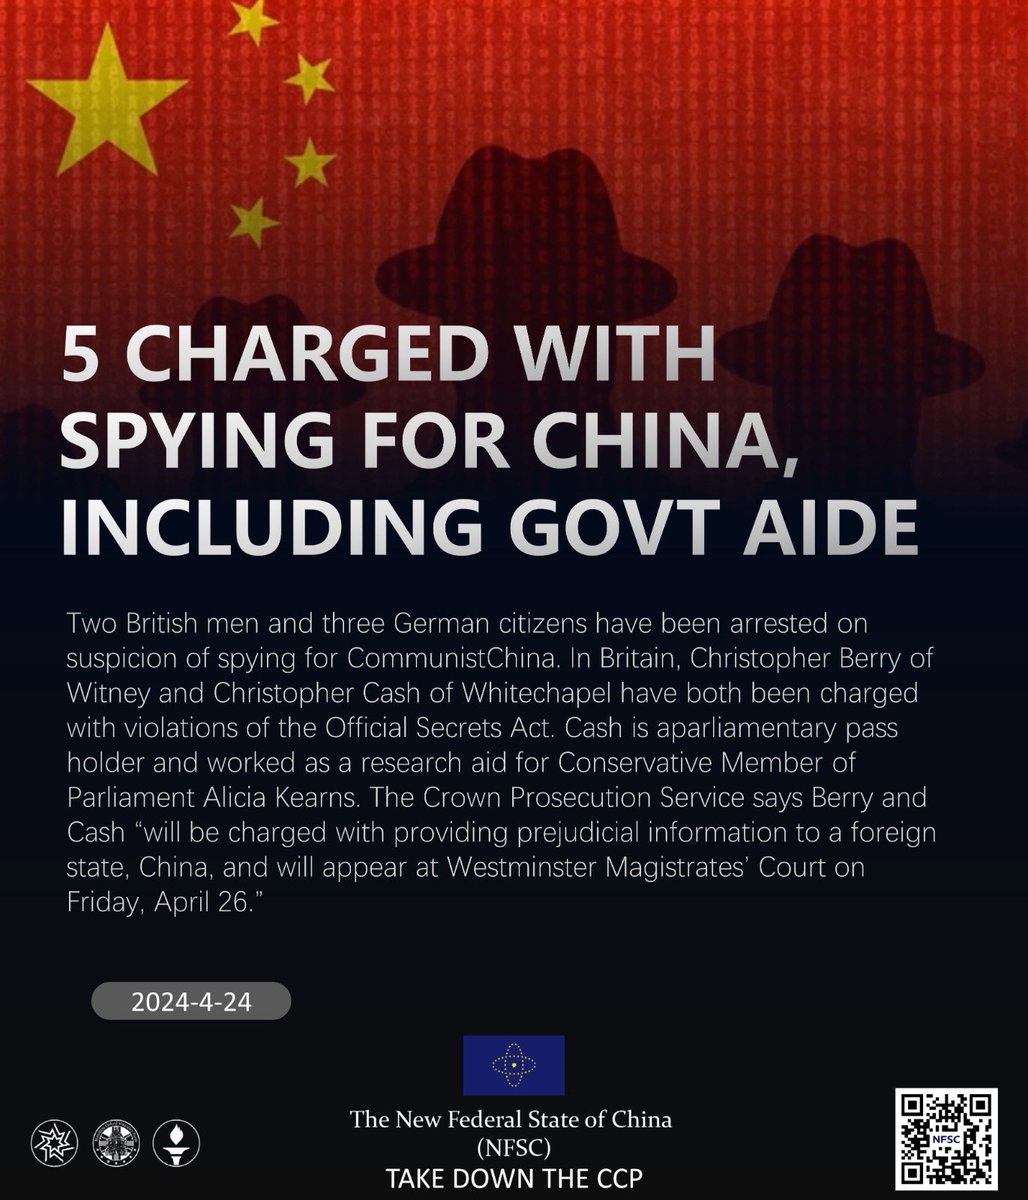 5 CHARGED WITH SPYING FOR CHINA, INCLUDING GOVT AIDE

04/24/2024 Two British men and three #German citizens have been arrested on suspicion of #spying for #CommunistChina.

#ccp≠chinese #ccp≠china #decouplefromchina #novaccines